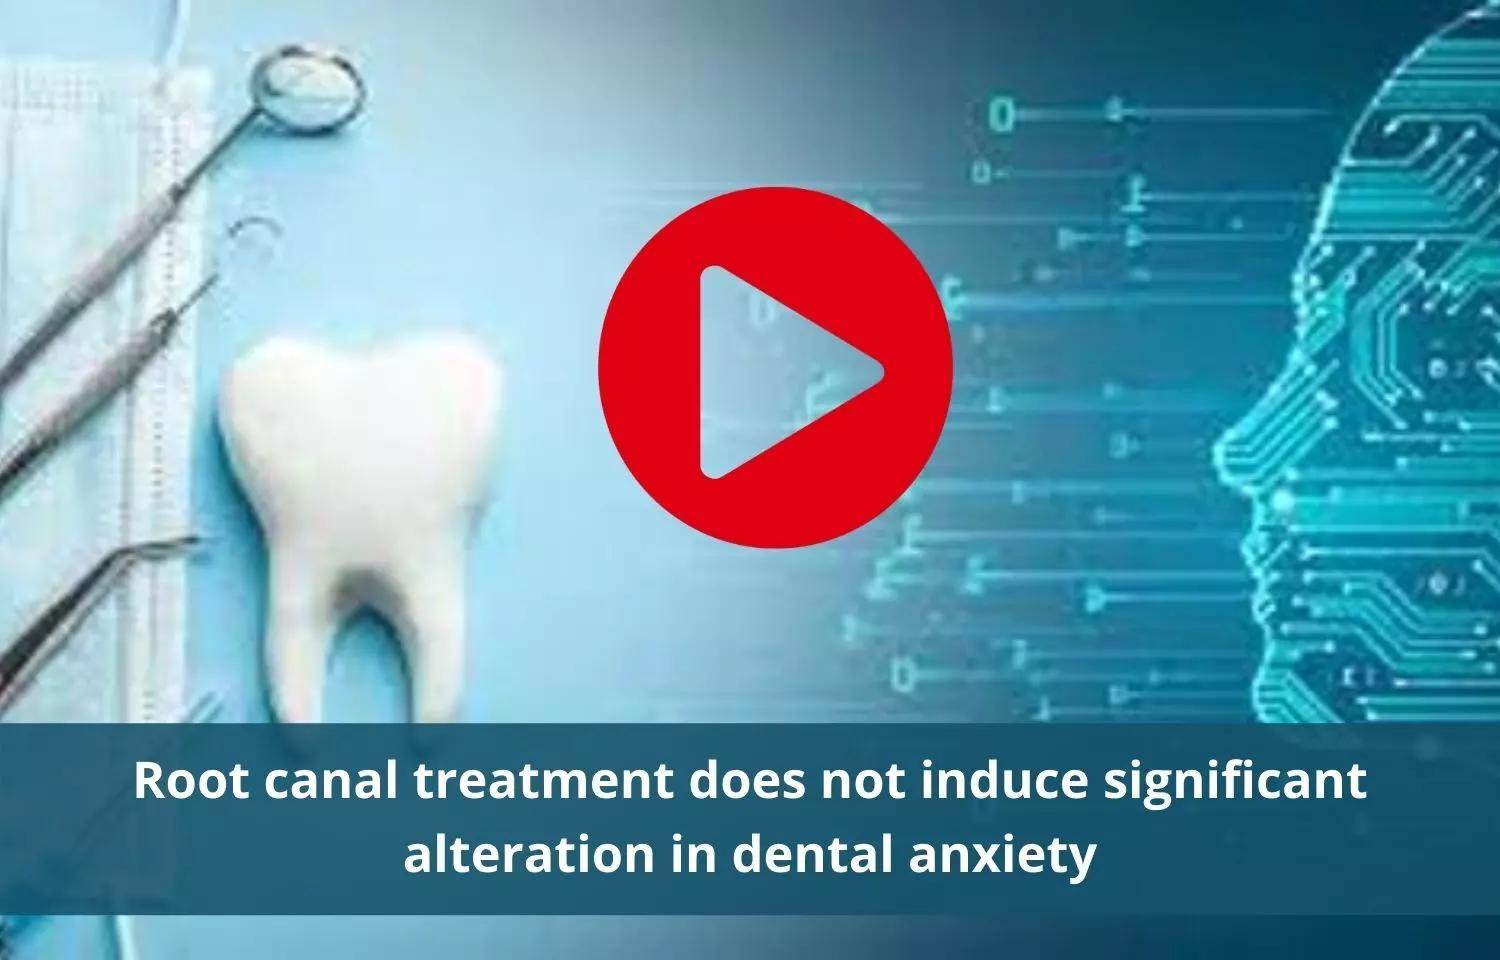 Root canal treatment doesnt induce dental anxiety